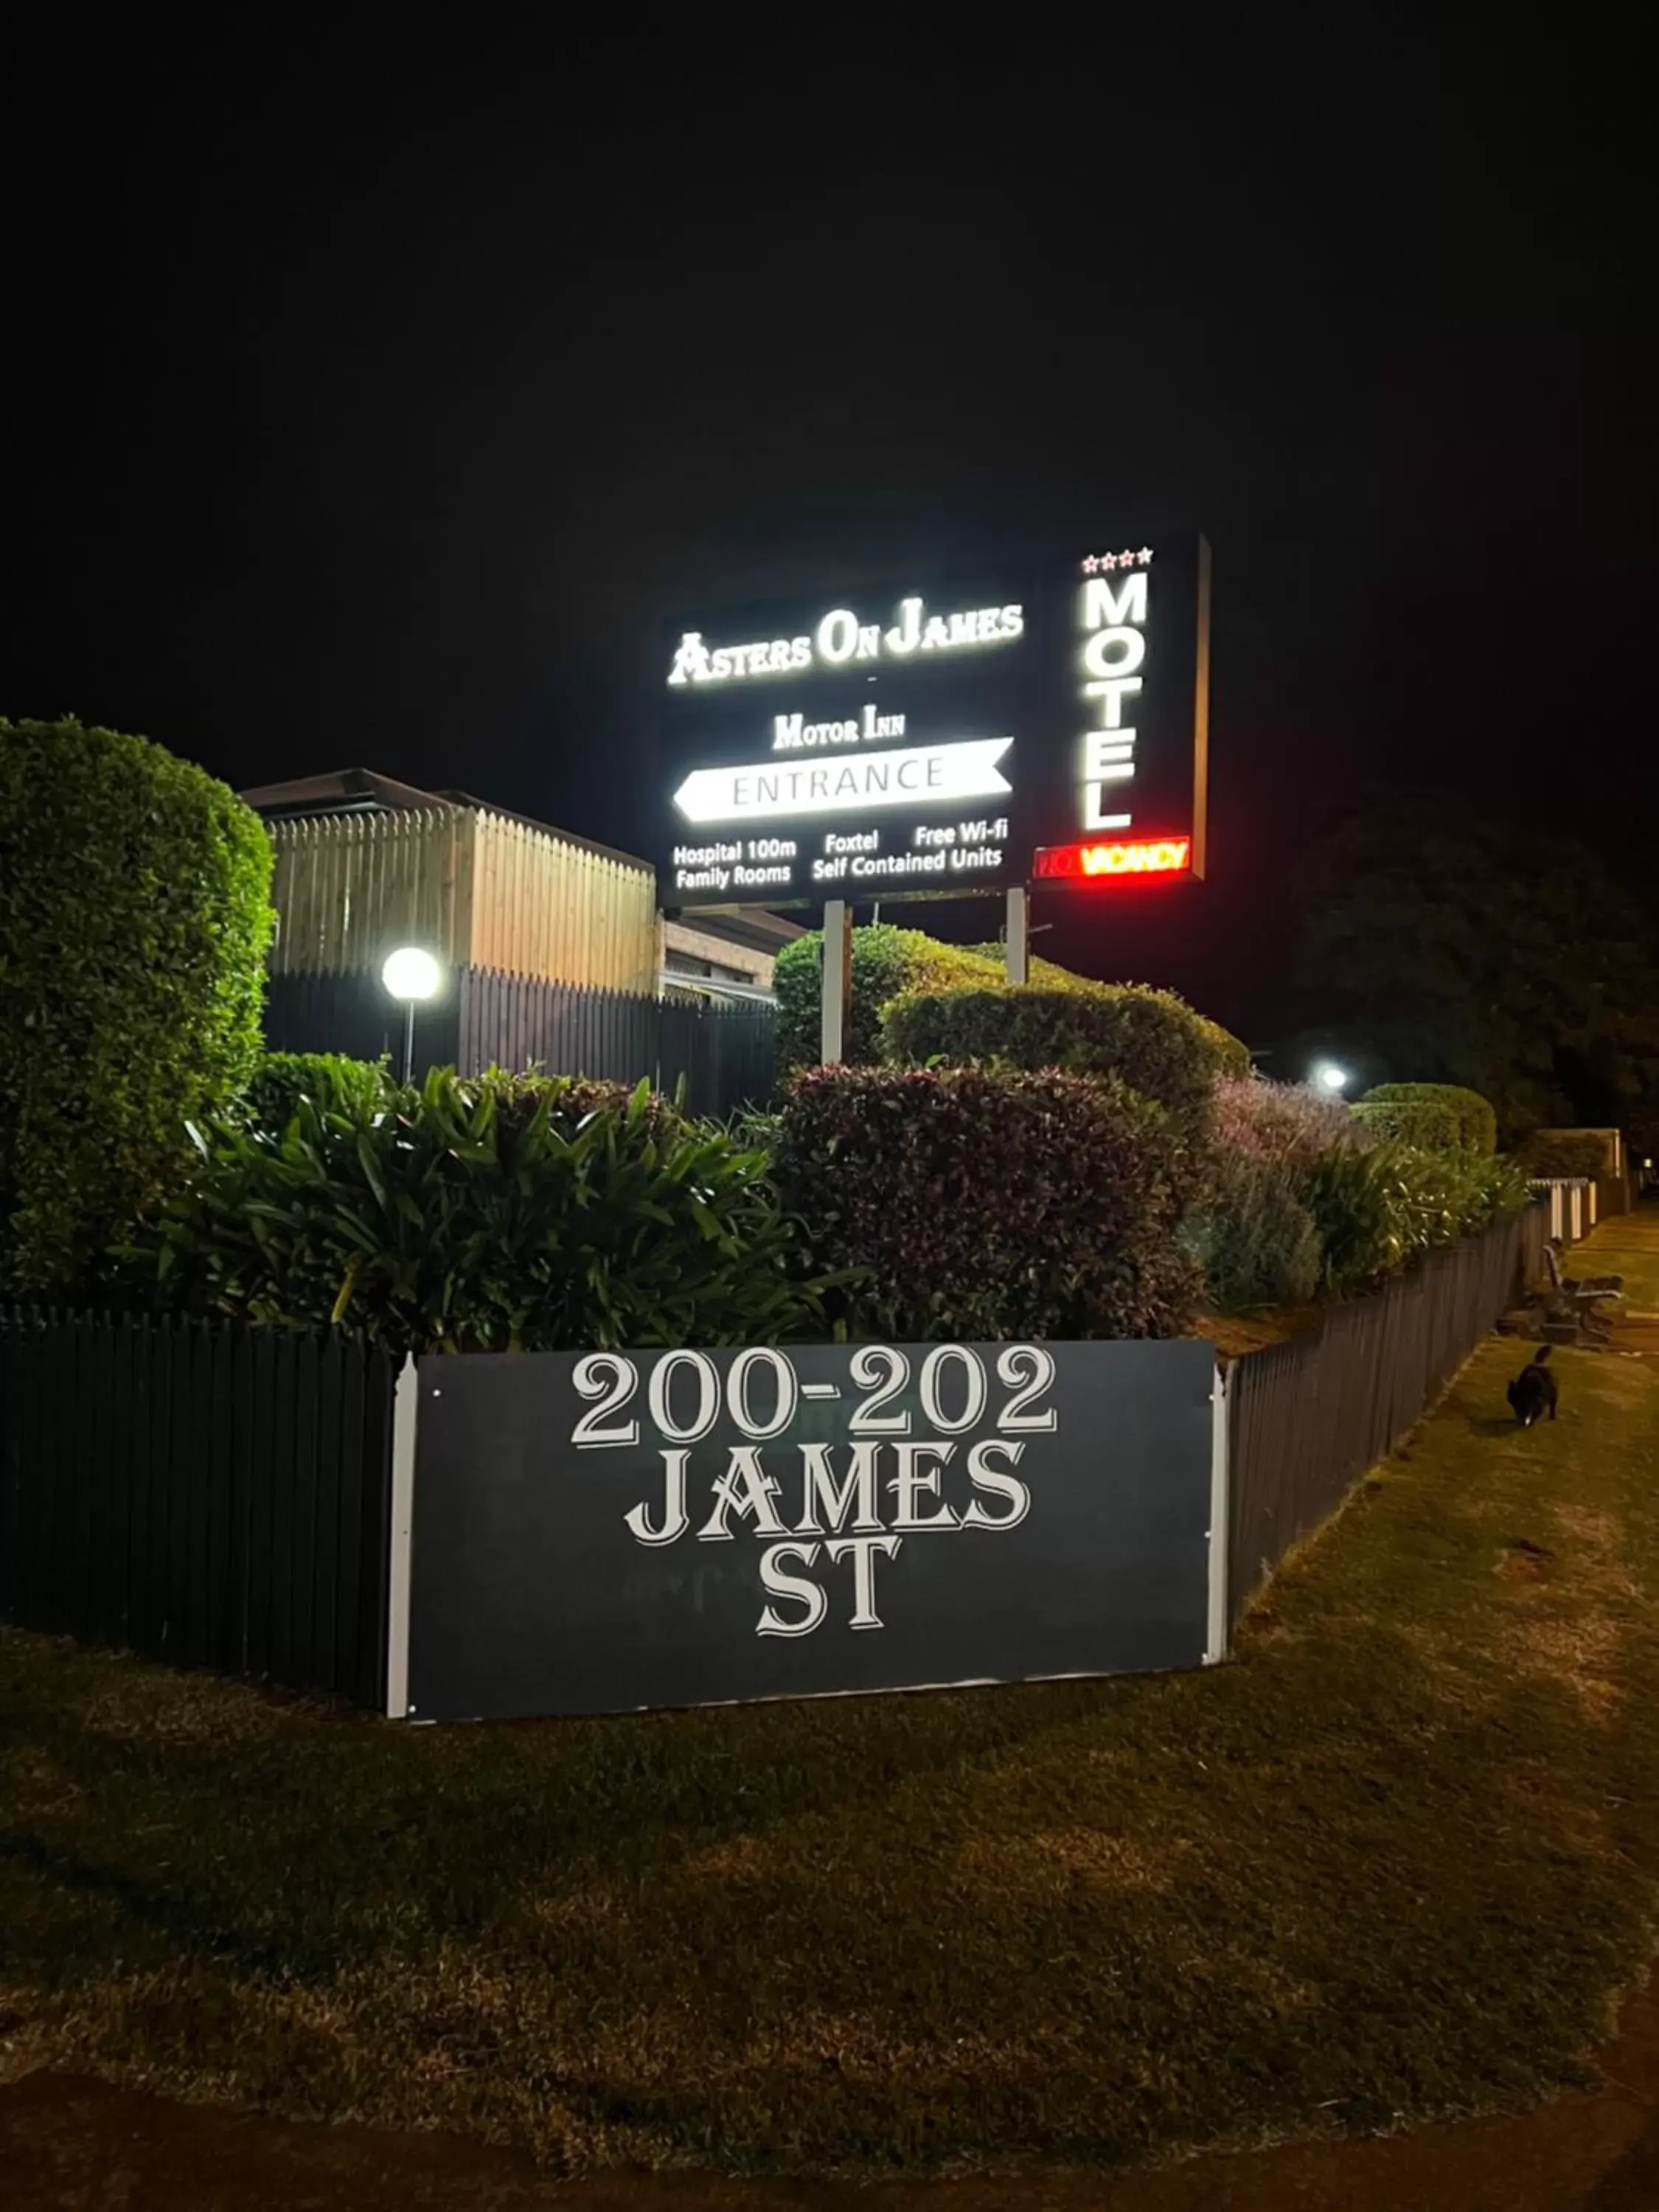 Property Logo/Sign in Asters On James Motor Inn